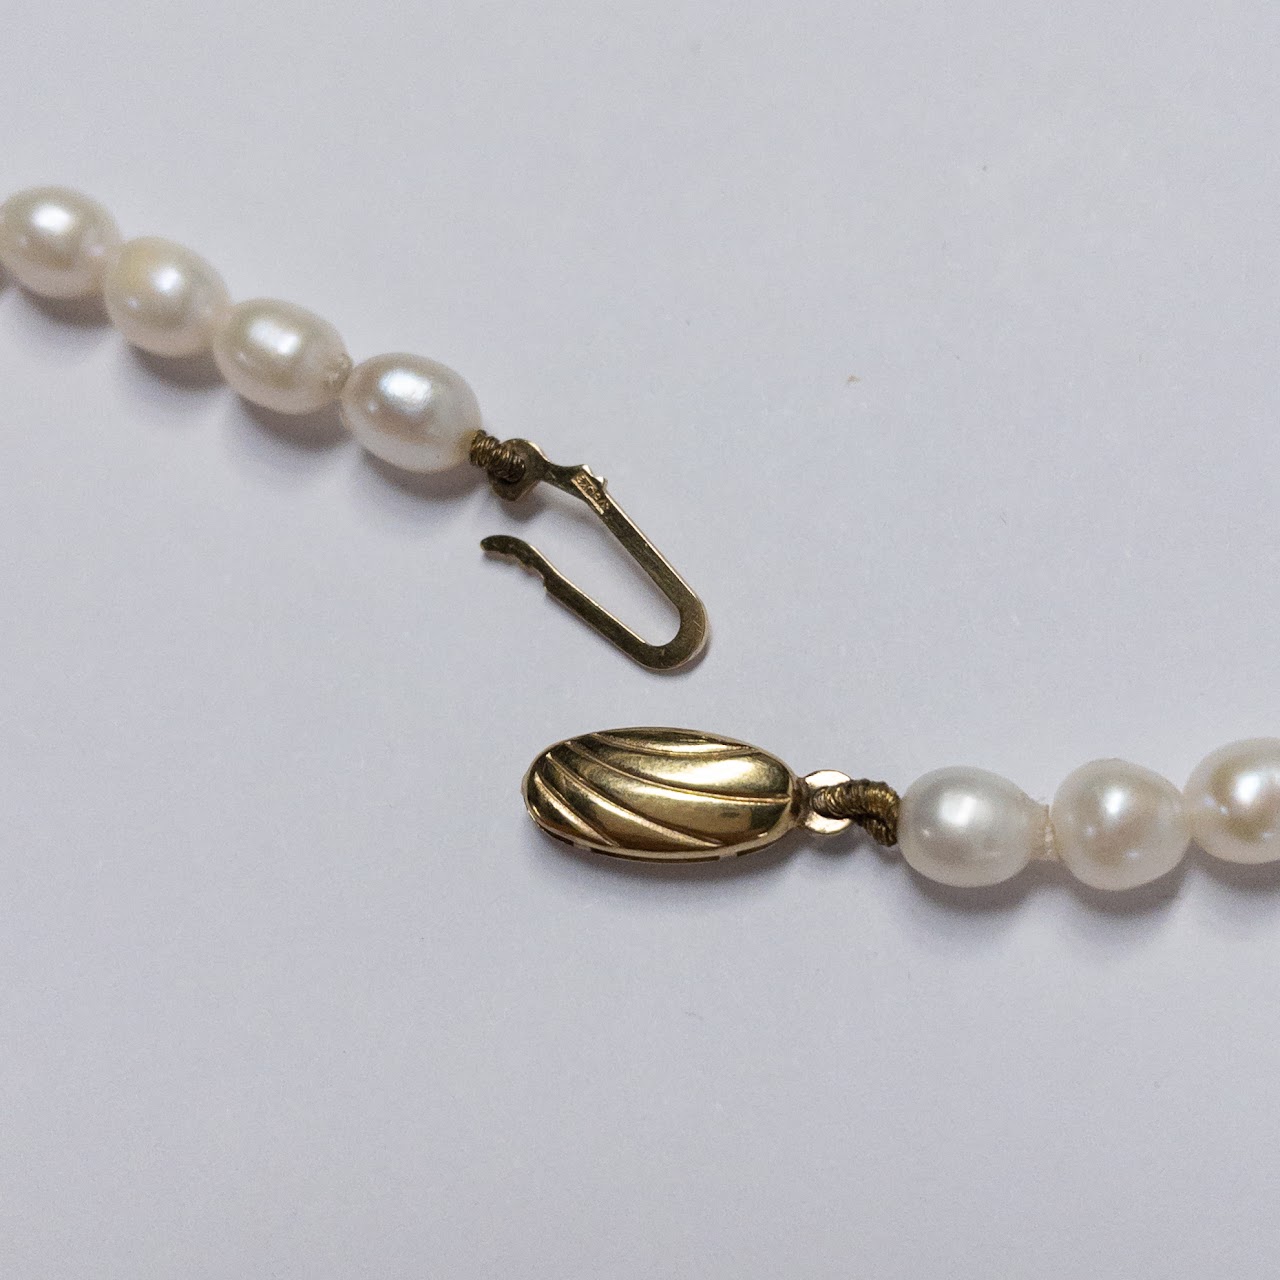 10K Gold & Pearl Strand Choker Necklace